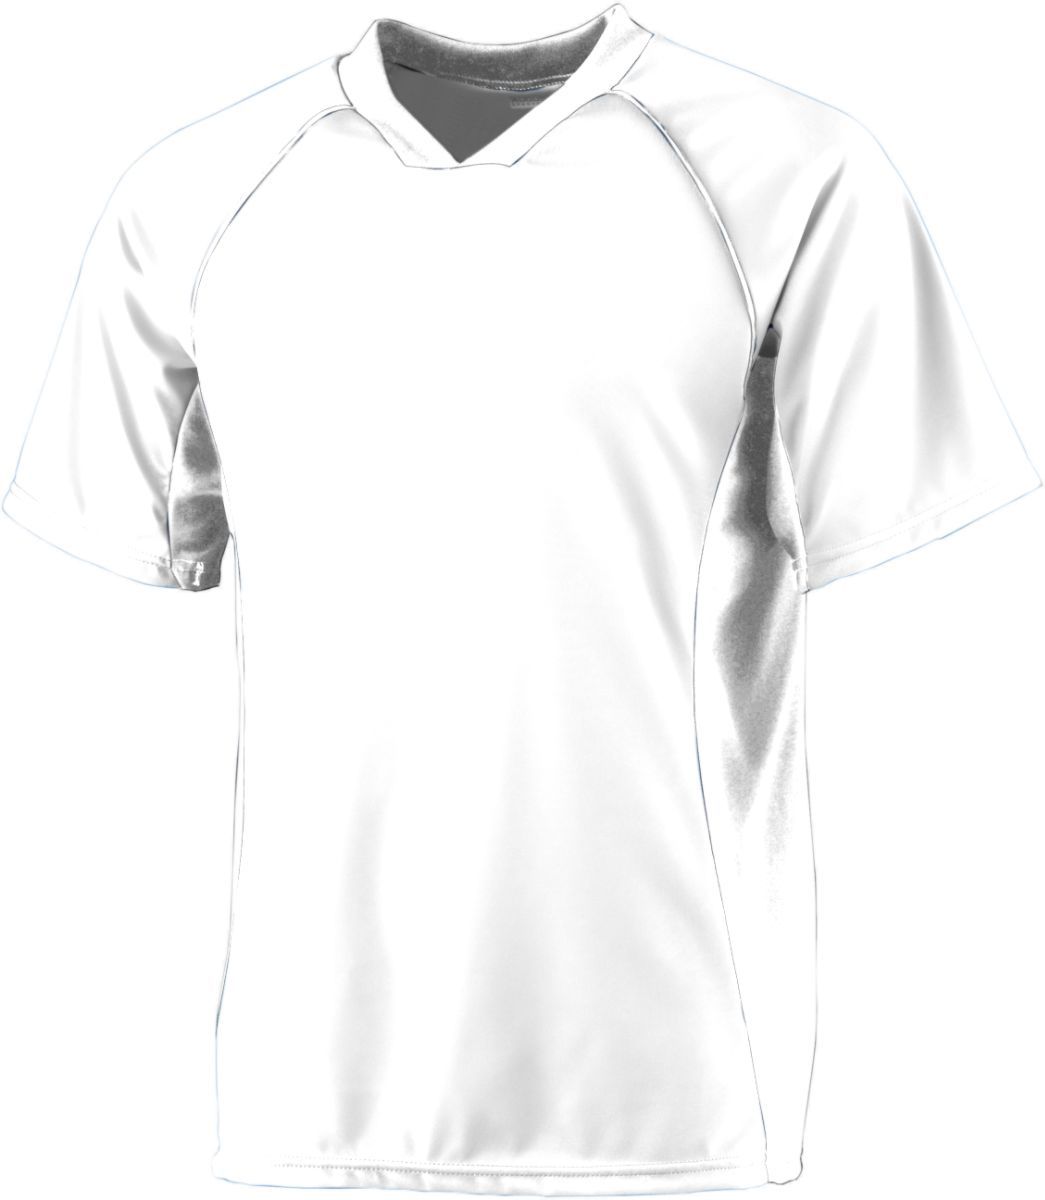 Augusta Sportswear Youth Wicking Soccer Jersey in White/White  -Part of the Youth, Youth-Jersey, Augusta-Products, Soccer, Shirts, All-Sports-1 product lines at KanaleyCreations.com